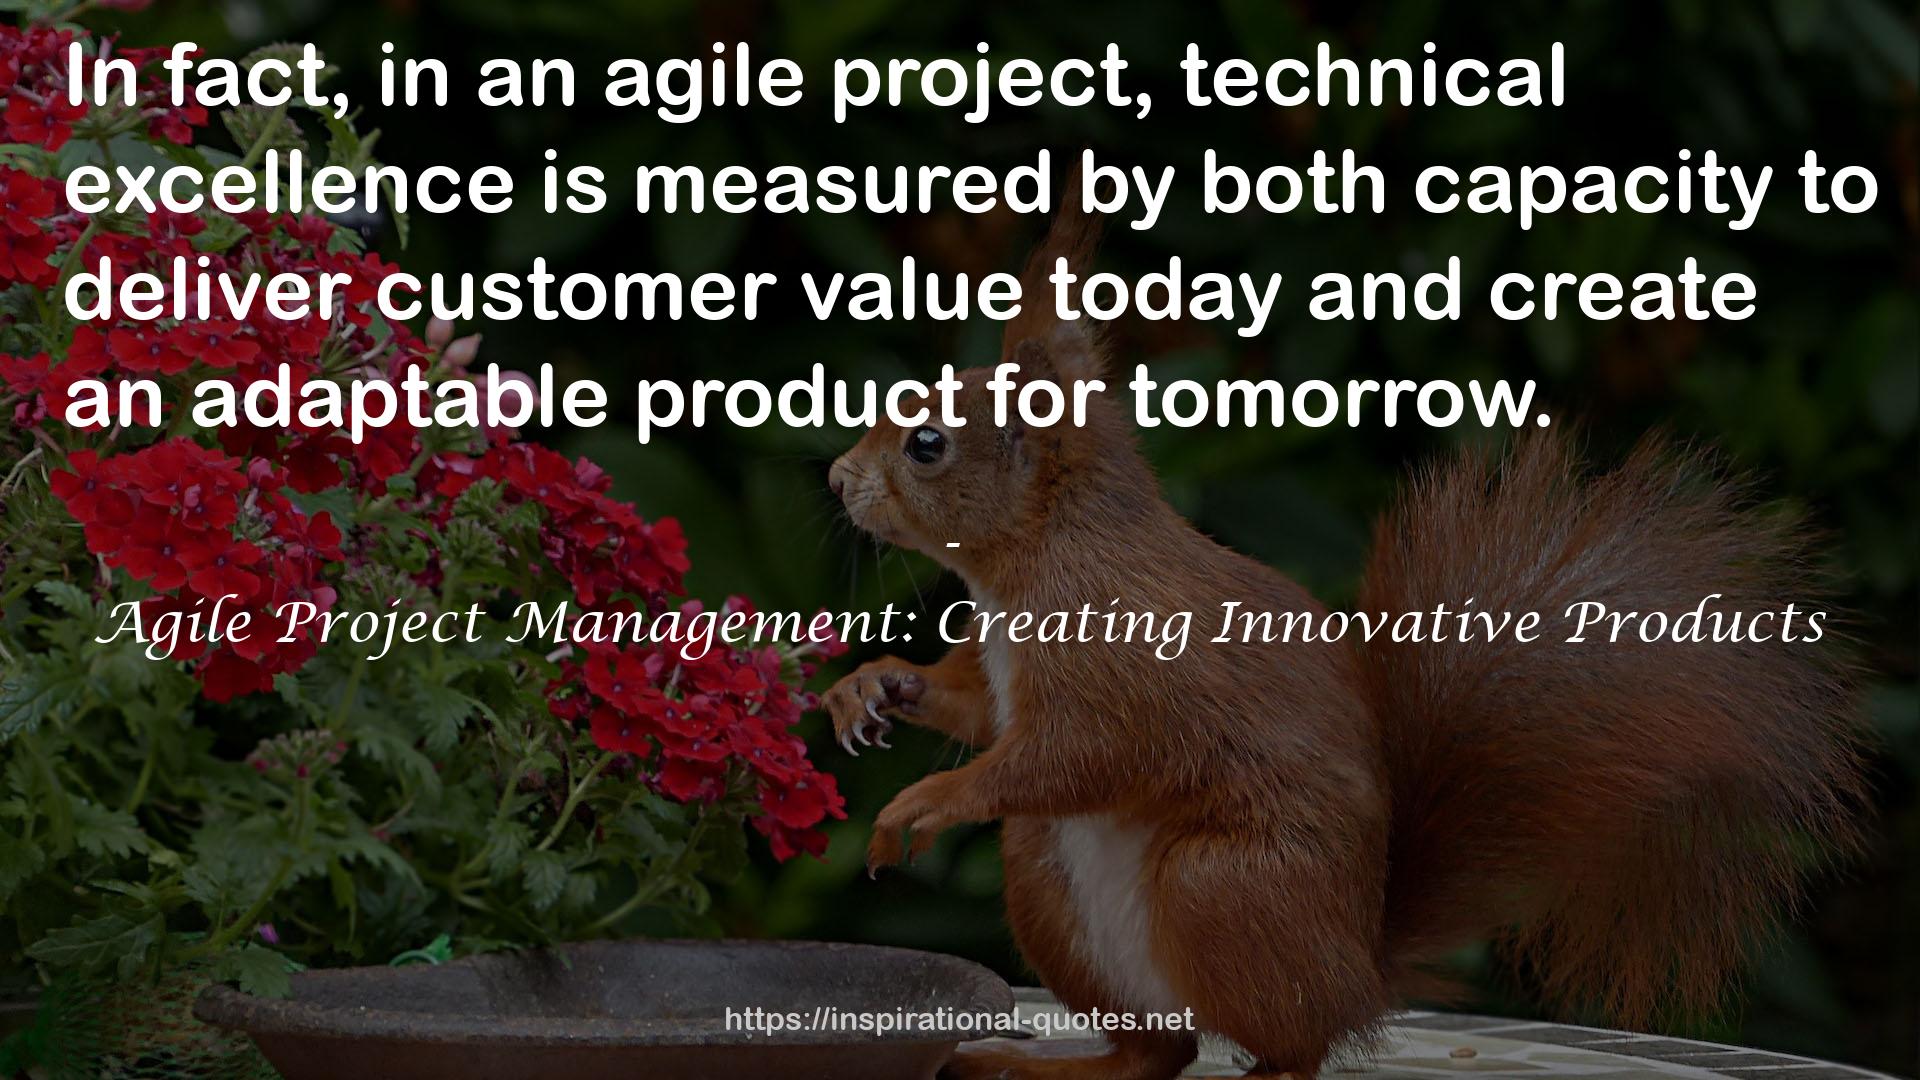 Agile Project Management: Creating Innovative Products QUOTES